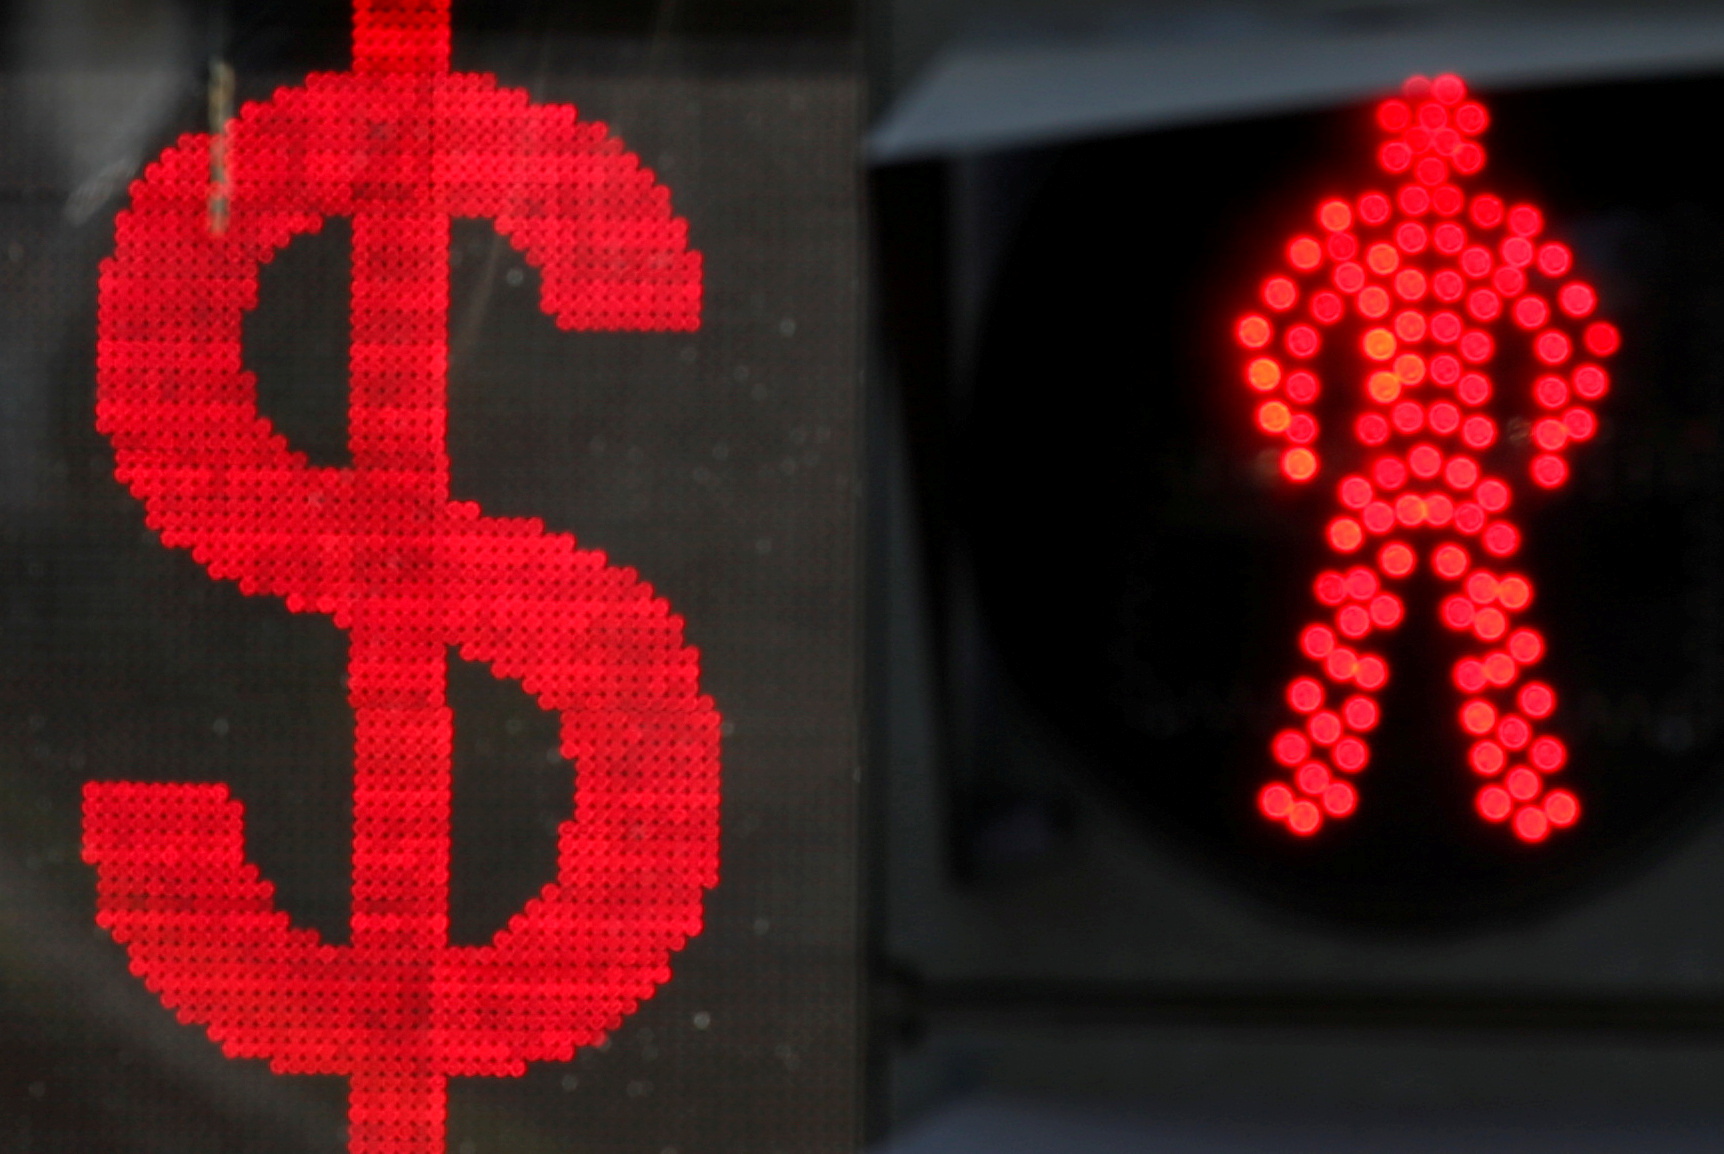 The U.S. dollar sign is seen on an electronic board next to a traffic light in Moscow, Russia August 10, 2018. REUTERS/Maxim Shemetov/File Photo